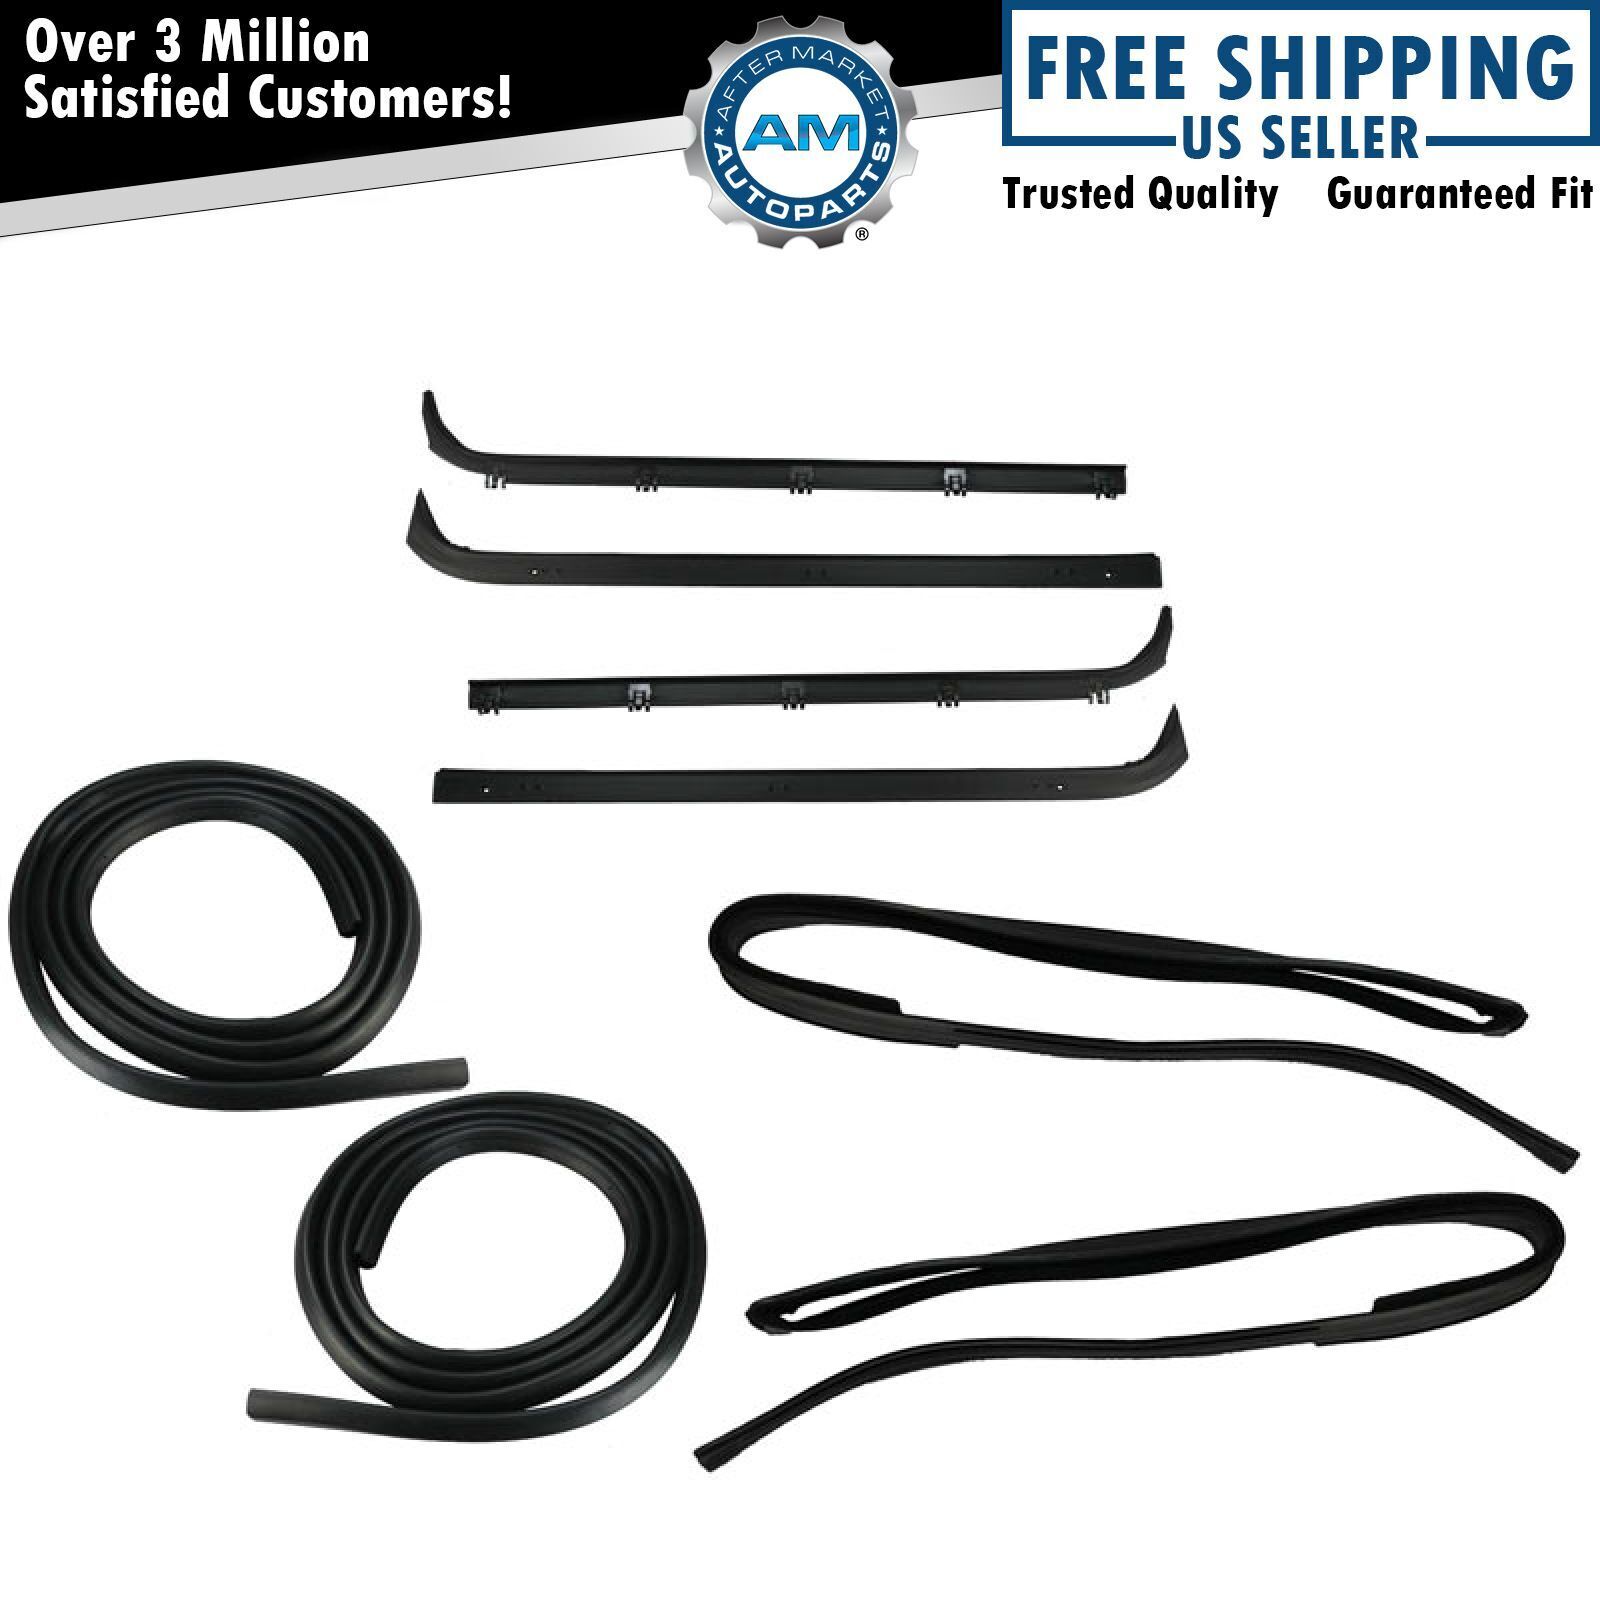 Door & Window Run Channel Sweep Felt Front Seal Kit for 80-86 Ford Pickup Truck